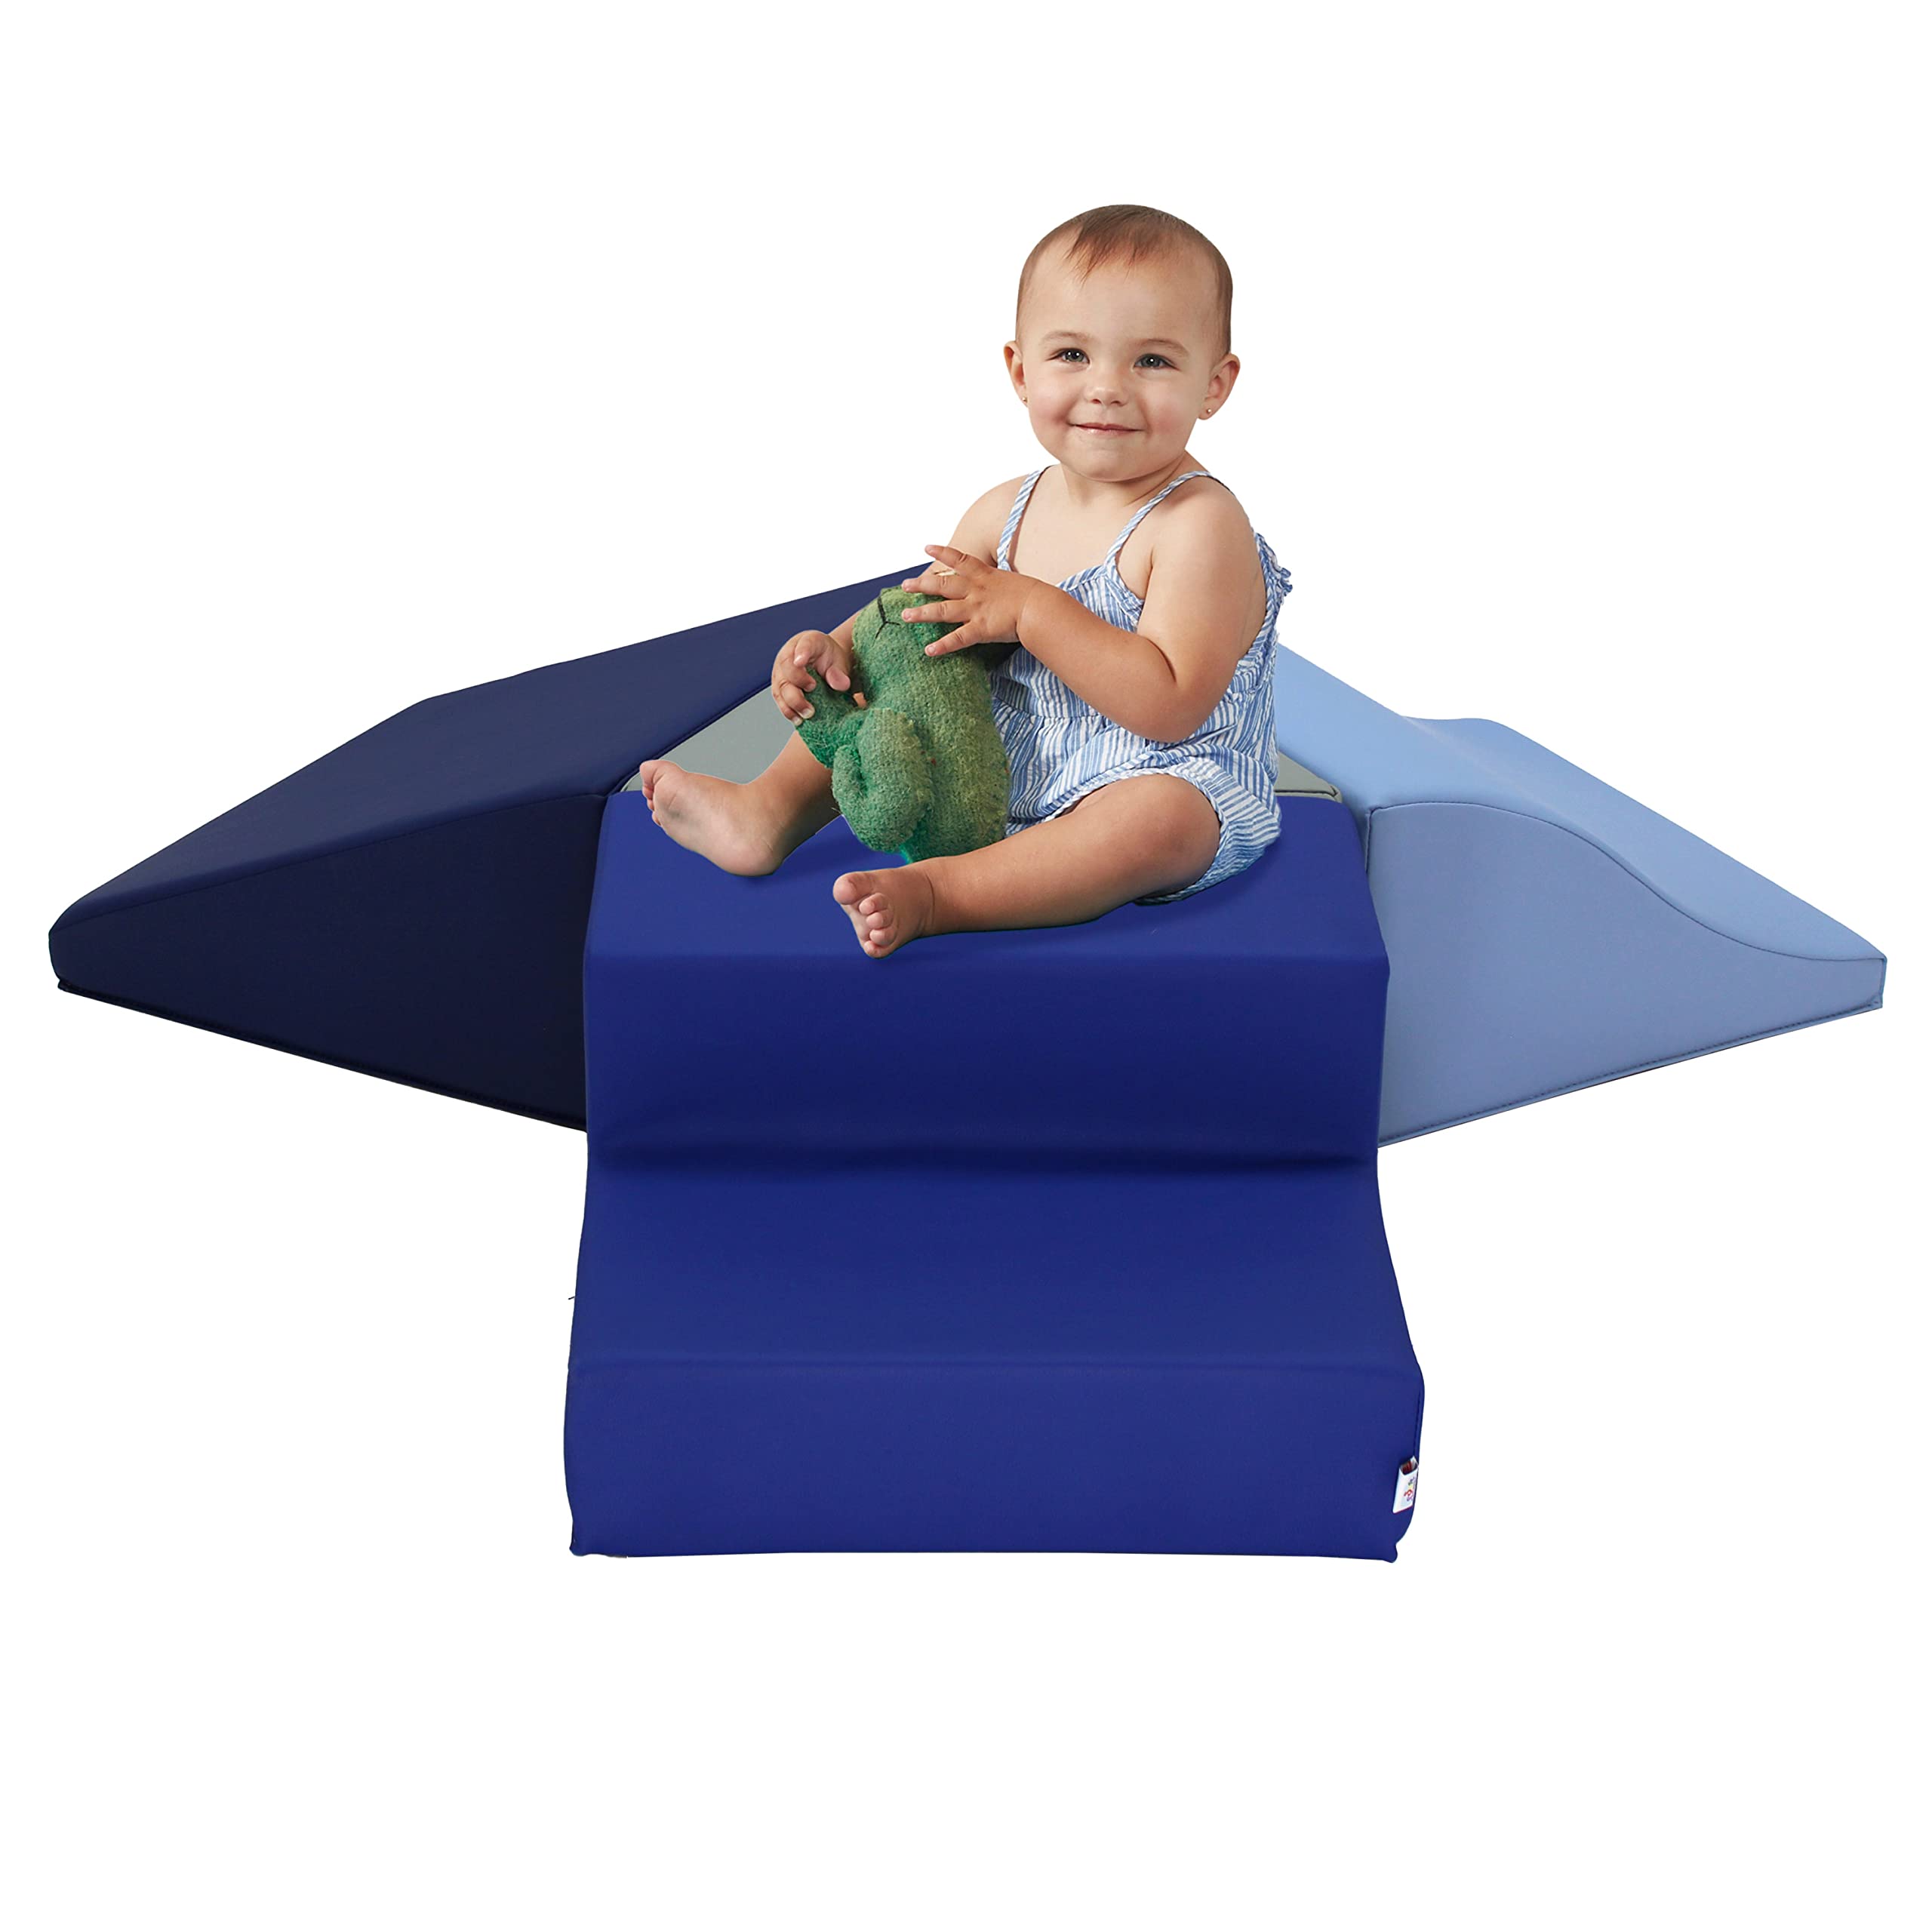 Factory Direct Partners 13799-NVPB SoftScape Toddler Playtime Junction 360 Climber, Indoor Active Play Structure (4-Piece) - Navy/Powder Blue